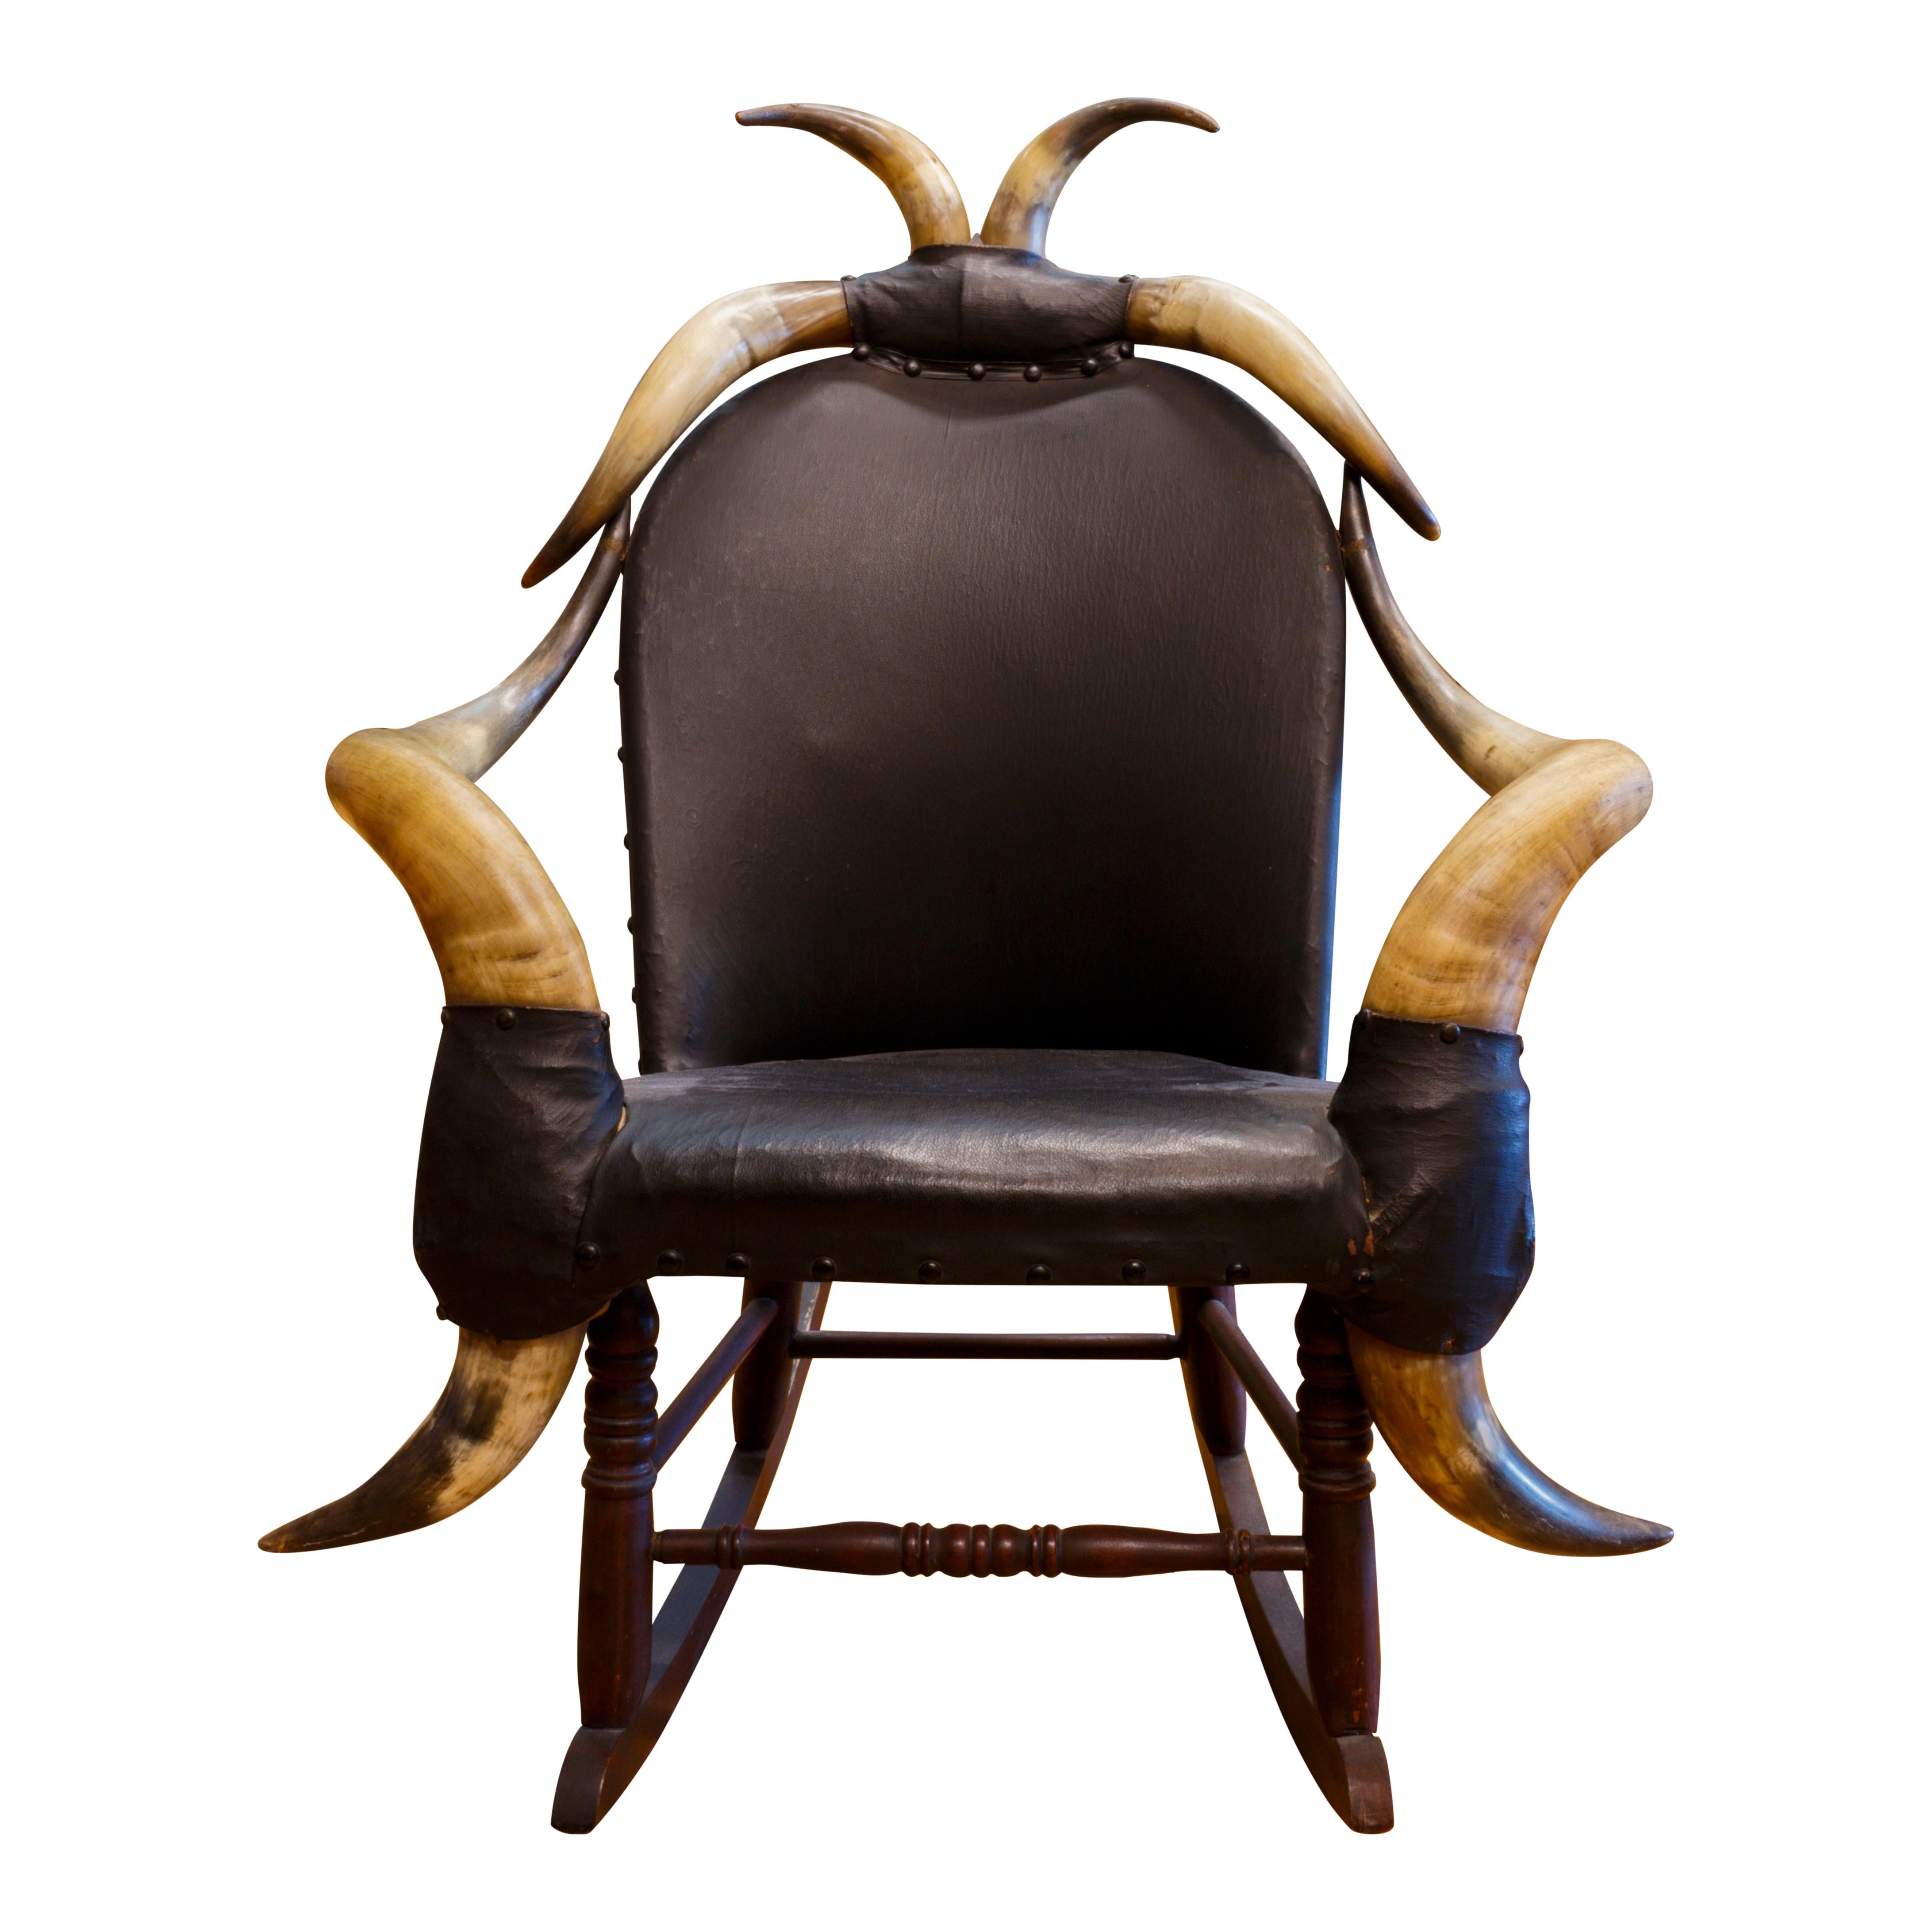 Eight horn rocker with original oil skin covering and spooled front spindle.

PERIOD: Last Quarter 19th Century
ORIGIN: Montana
SIZE: 28